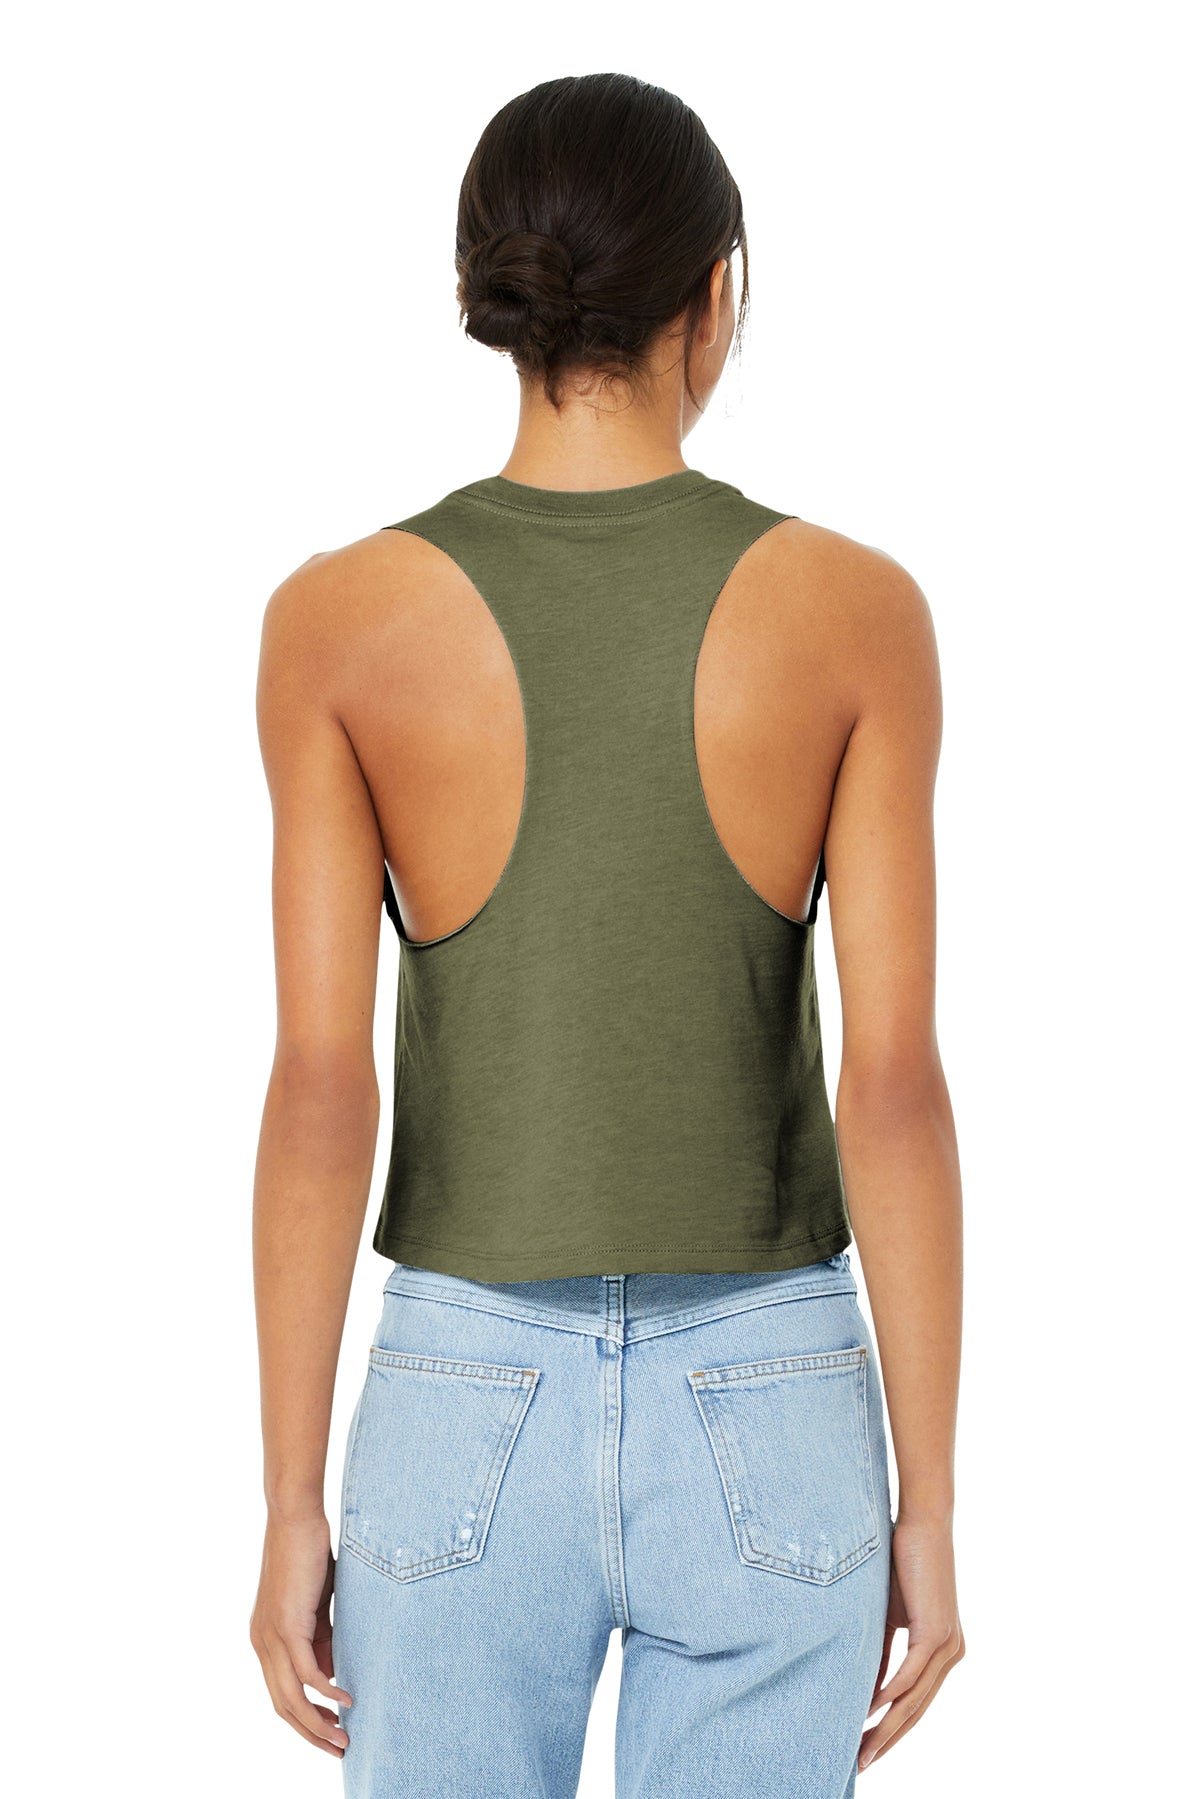 Canopy Ladies Muscle Tank